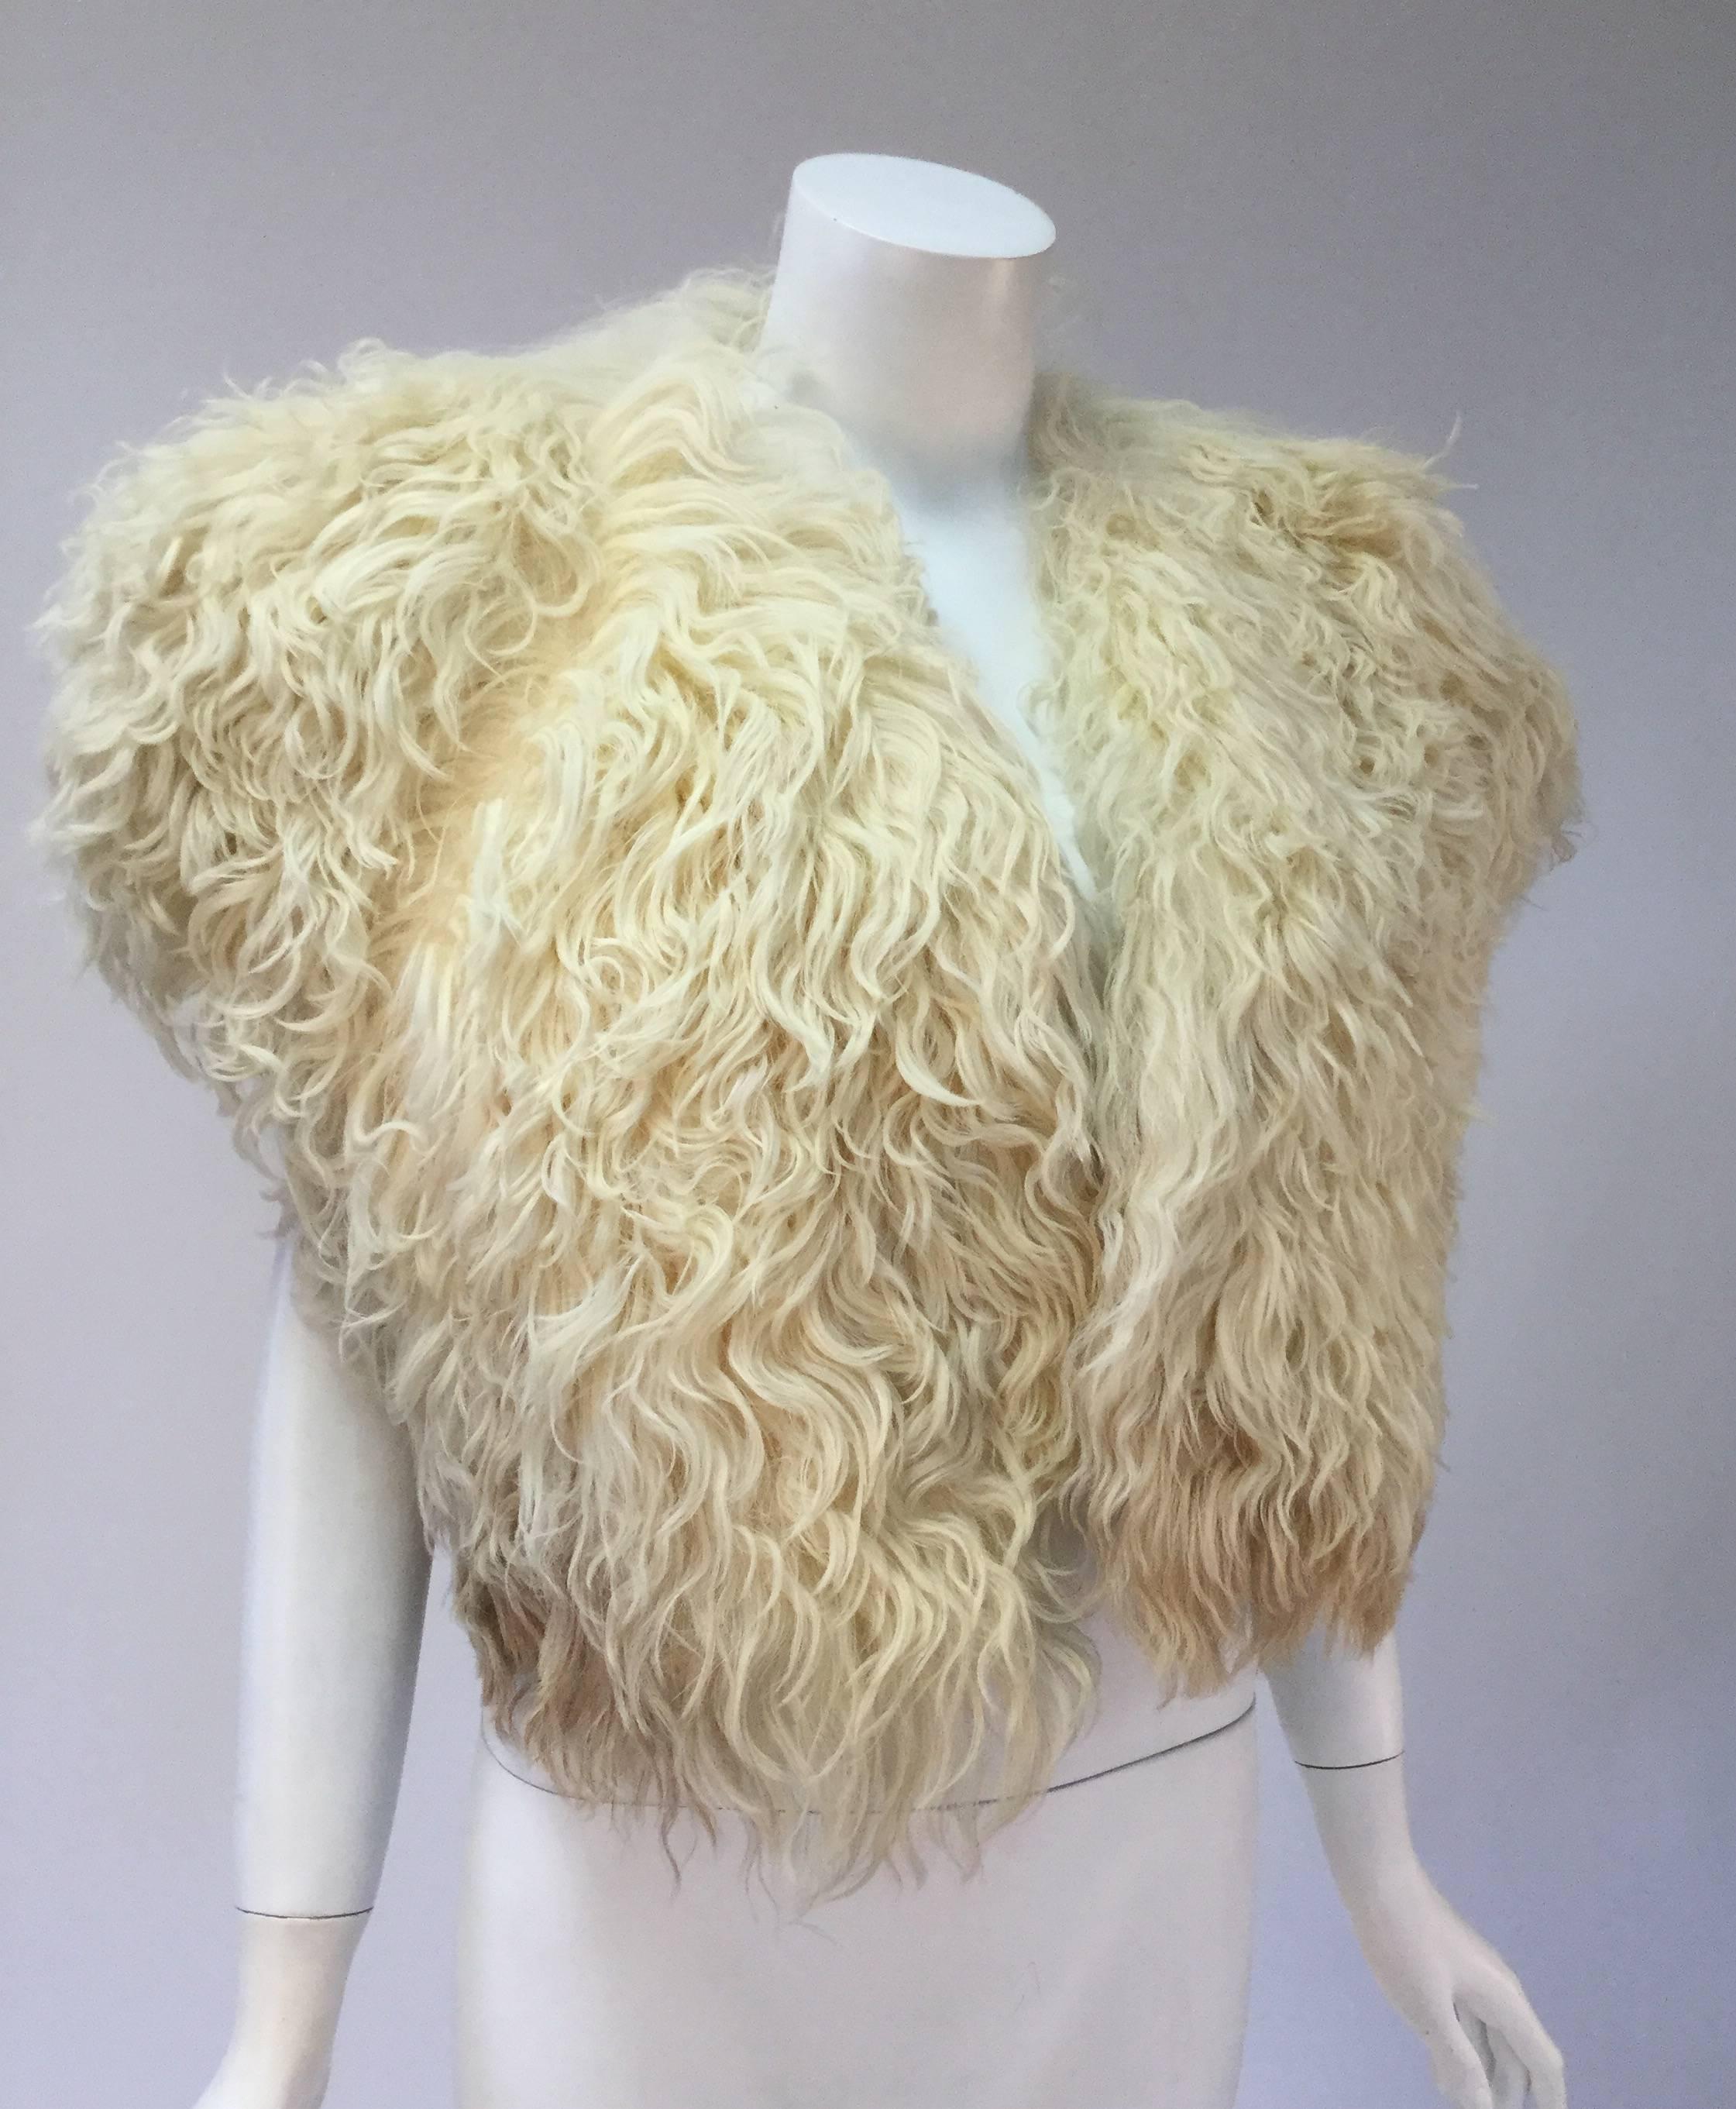 Fantastic Courreges Paris cream karakul bolero.  Alluring ombre long fur from white to light brown, cropped, sleeveless, open front, L 18